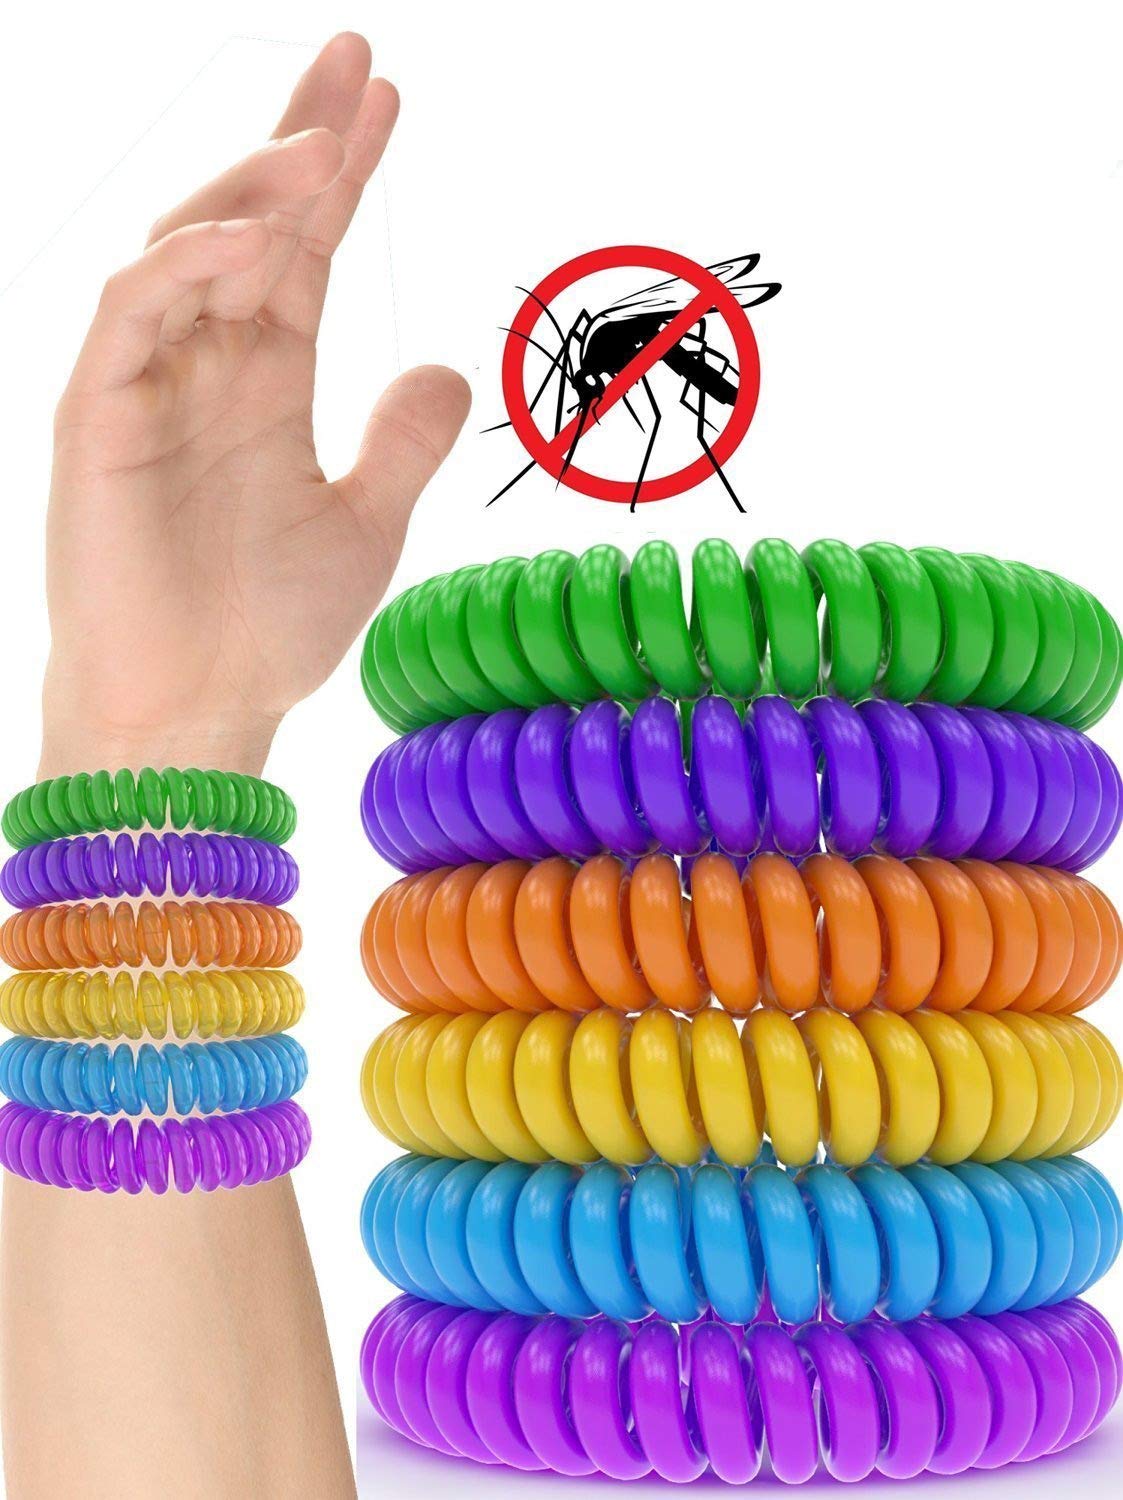 12 Pack Natural Anti Mosquito Insect & Bug Repellent Bracelet Band Wristbands Waterproof for Kids, Adults, Pets - Travel Size Mosquito Repellent